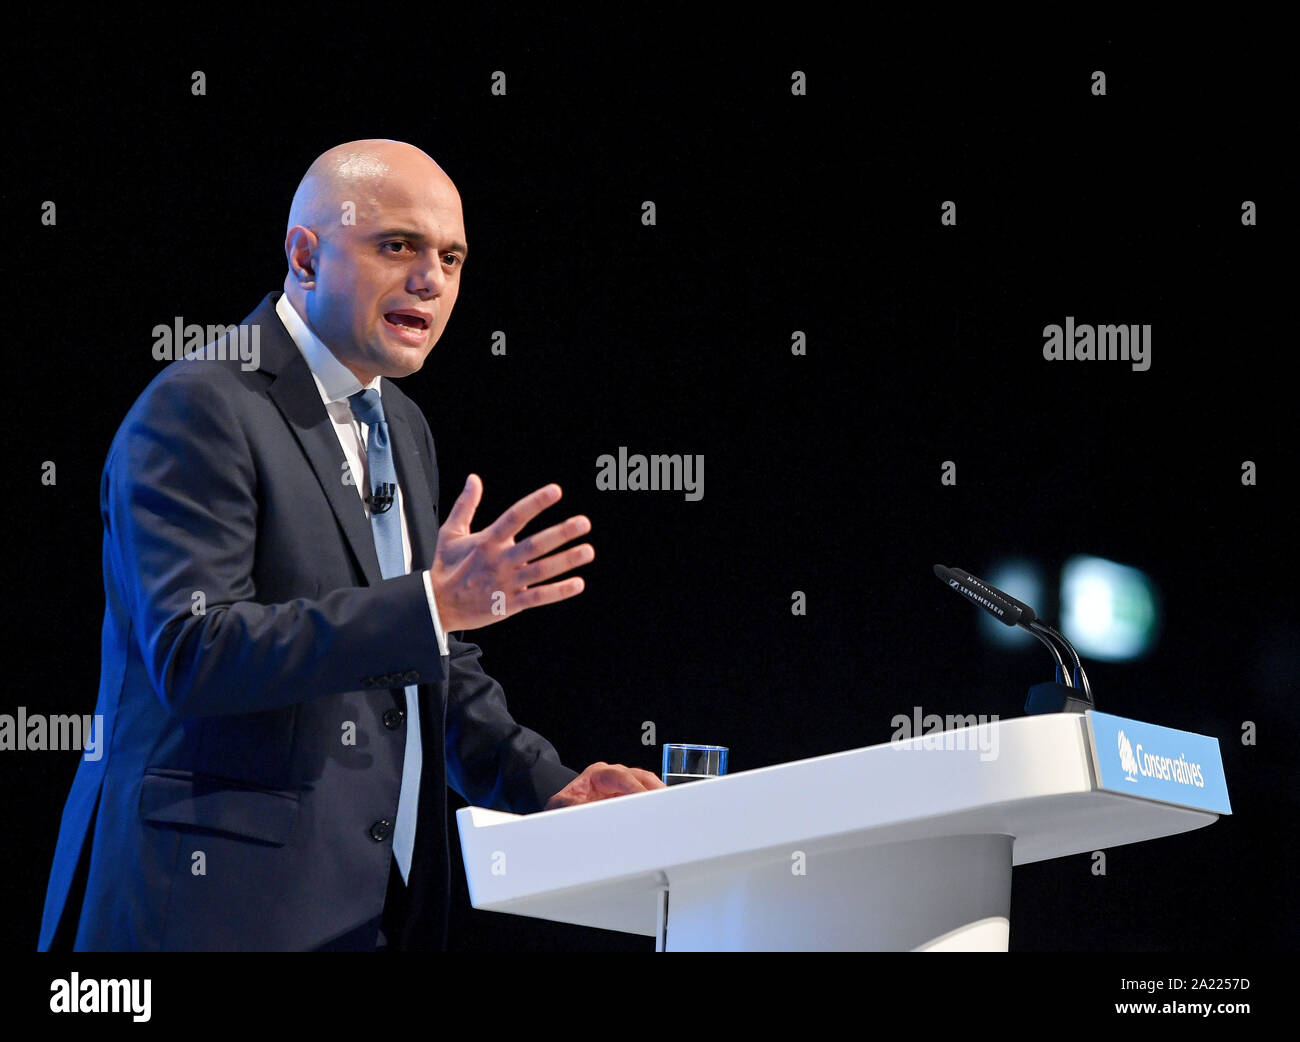 Manchester, UK. 30th Sep, 2019. MANCHESTER, UK. Chancellor of the Exchequer Sajid Javid delivers his keynote speech at the Conservative Party conference in Manchester. Credit: Dave Johnston/Alamy Live News Stock Photo